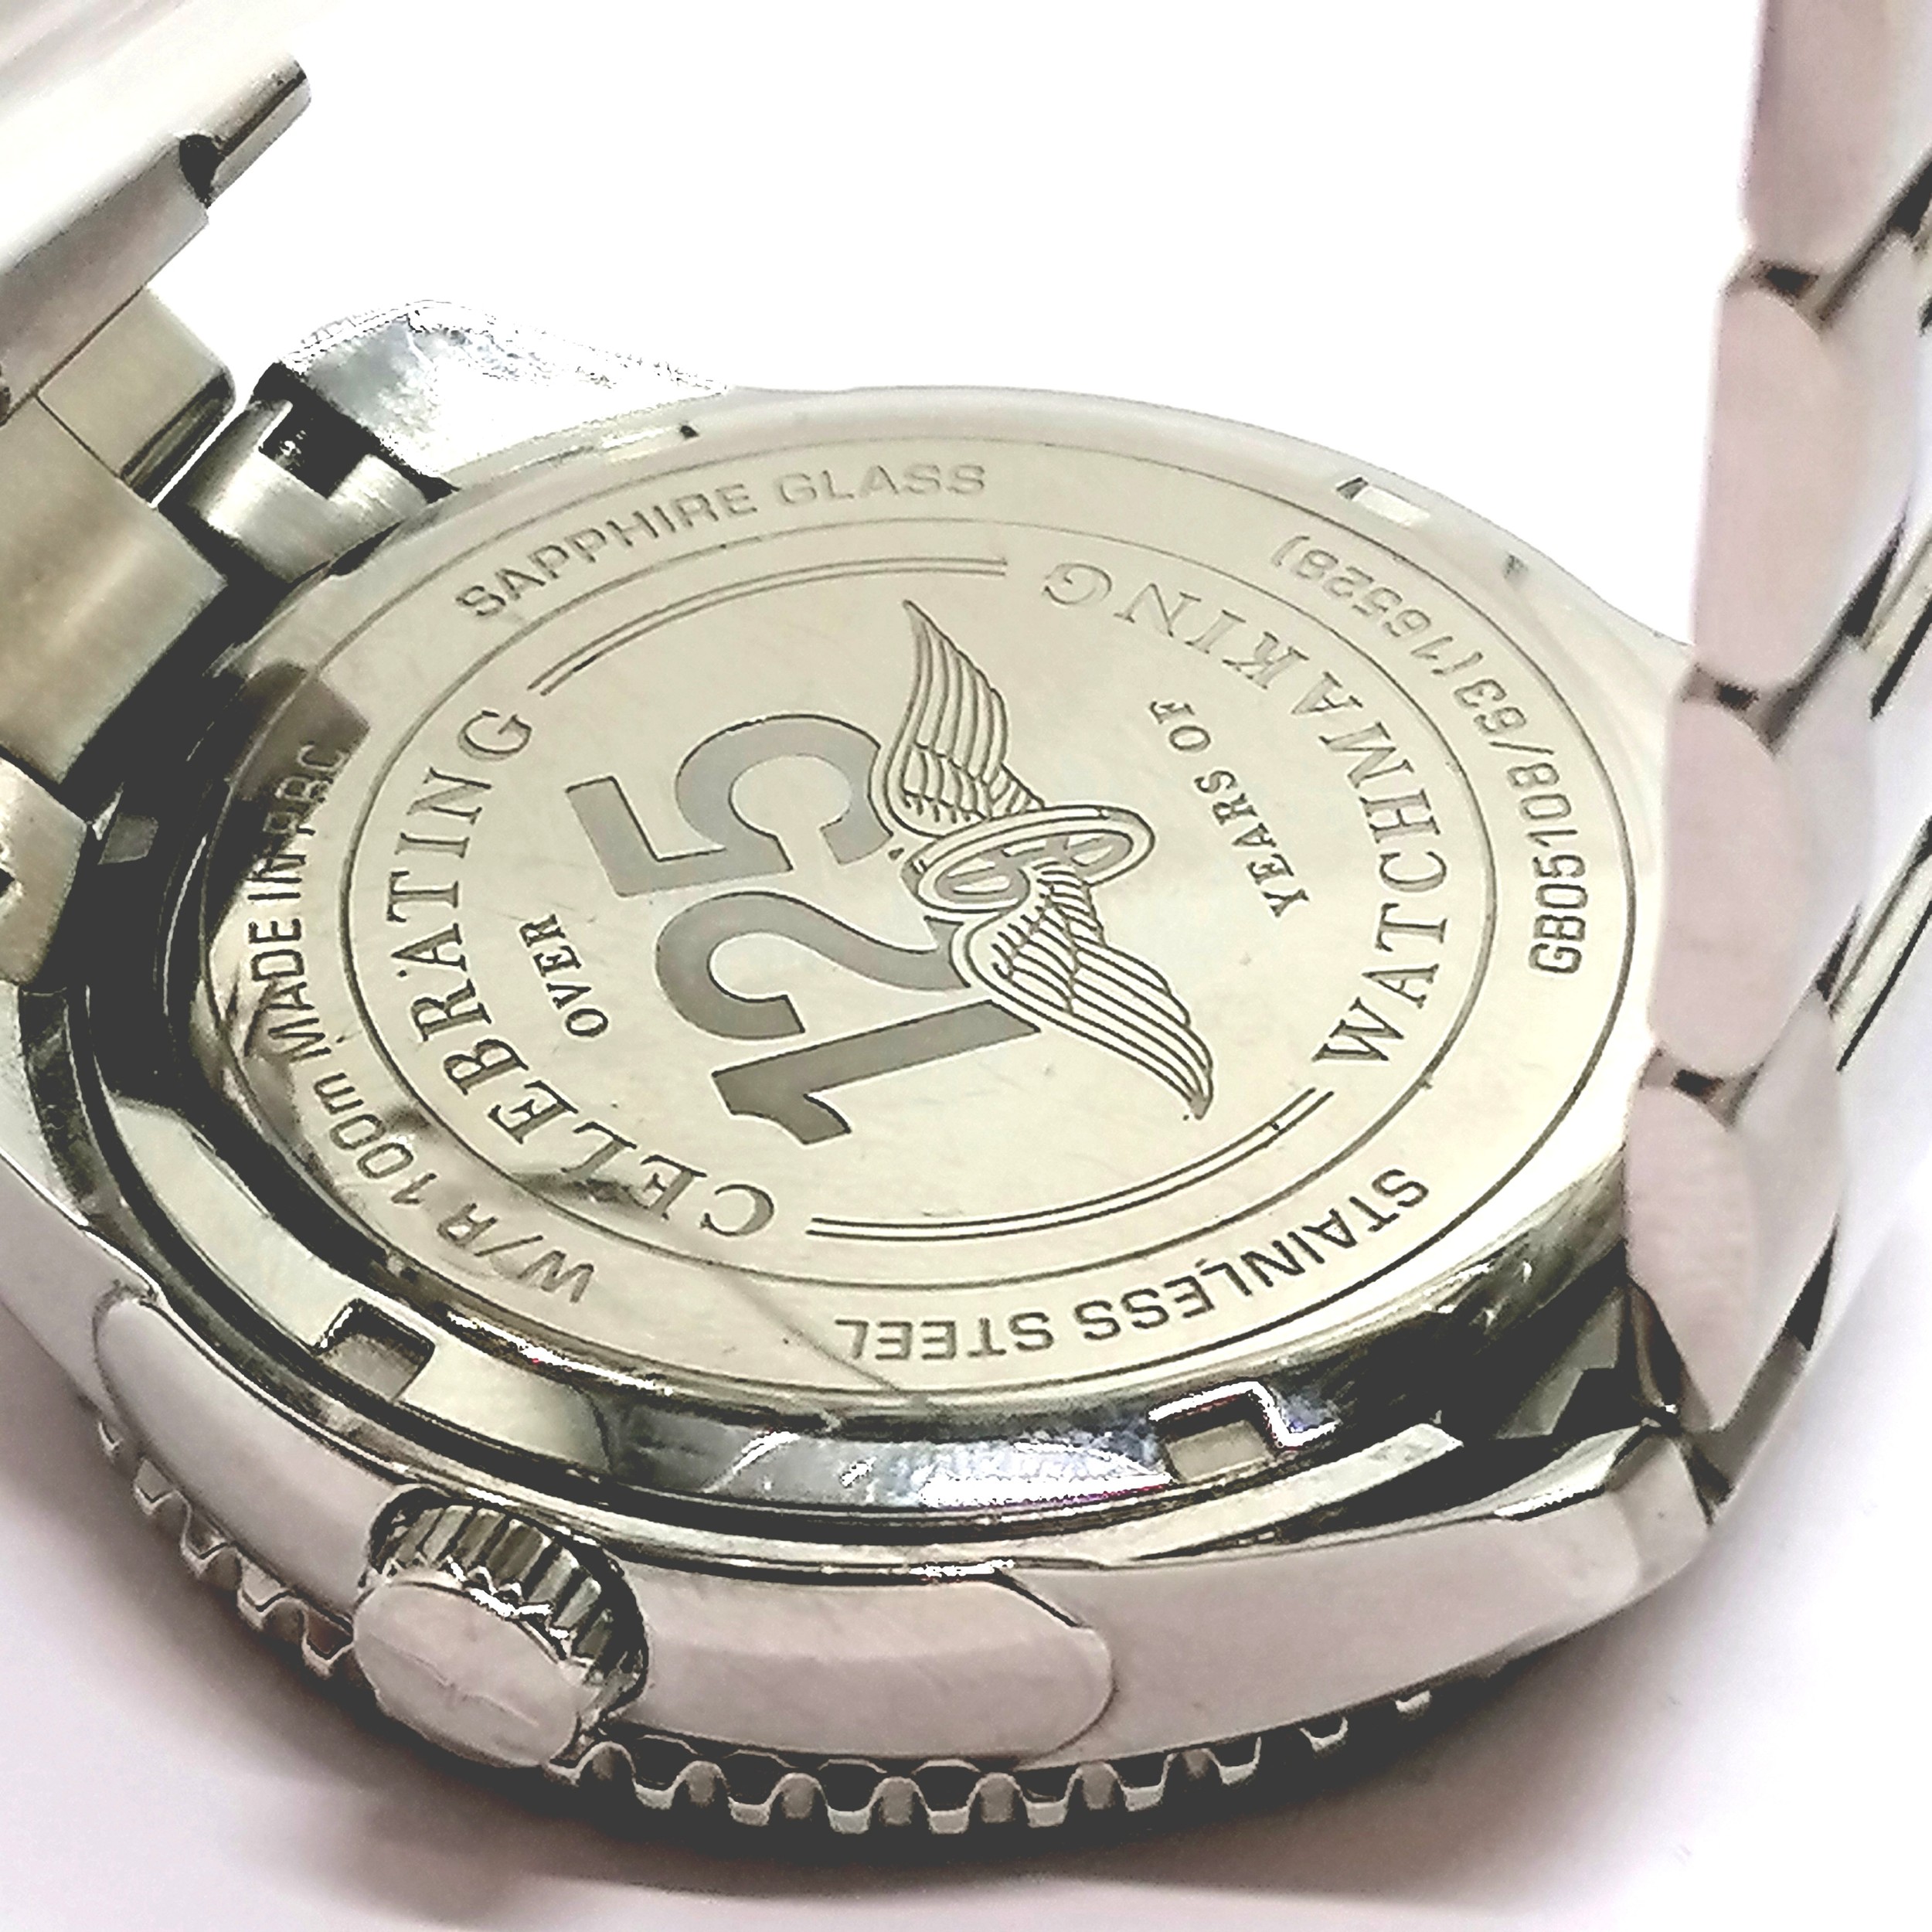 Rotary Henley GMT gents quartz stainless steel (40mm case) wristwatch - runs BUT WE CANNOT GUARANTEE - Image 3 of 3